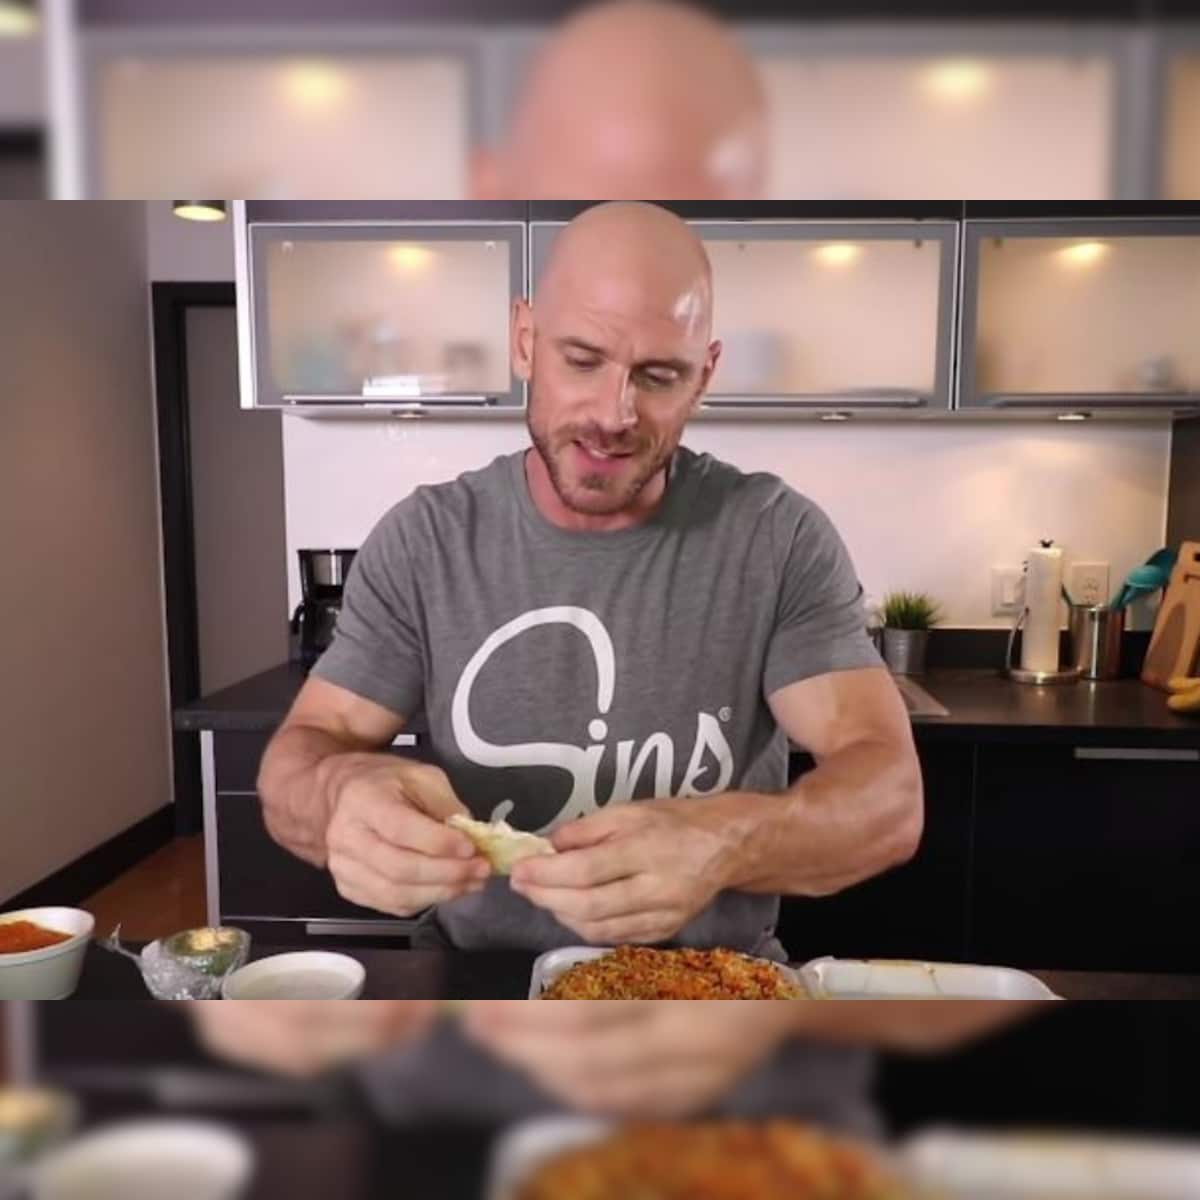 Johy Sin Adult Download Com - Adult Actor Johnny Sins Just Tried Biryani With Naan and the Internet is  Done For the Day